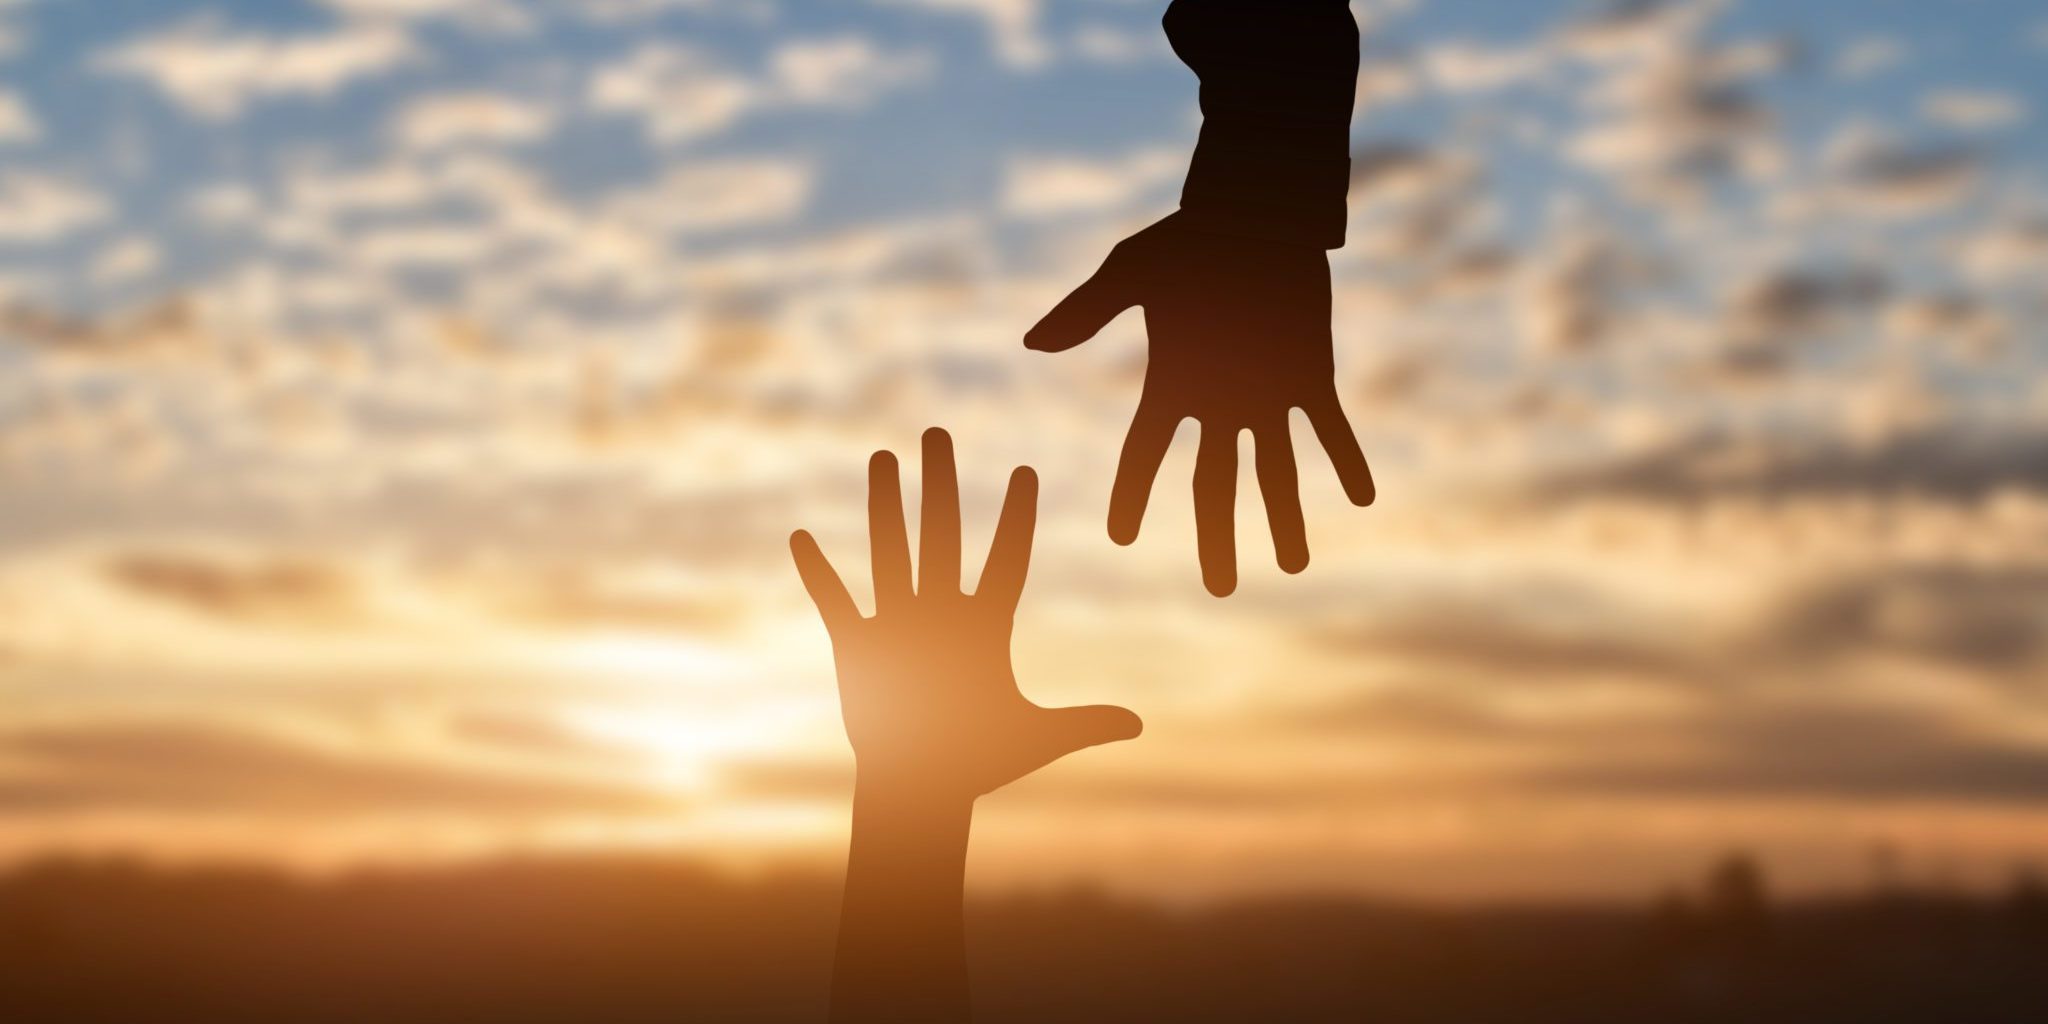 Silhouette of reaching, giving a helping hand, hope and support each other over sunset background. Help concept